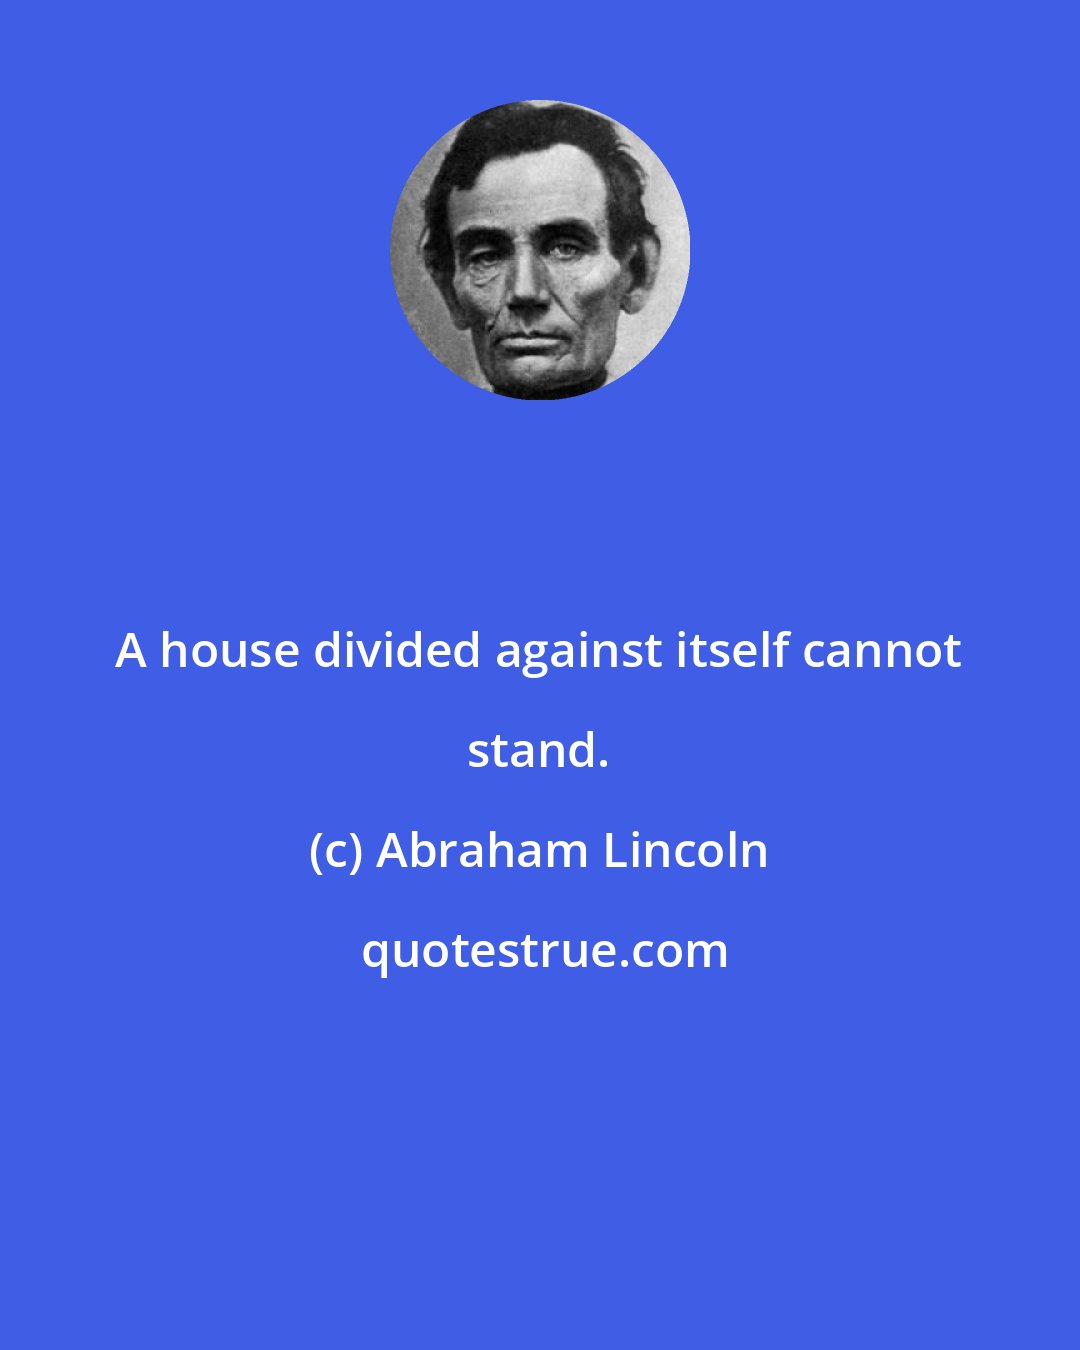 Abraham Lincoln: A house divided against itself cannot stand.